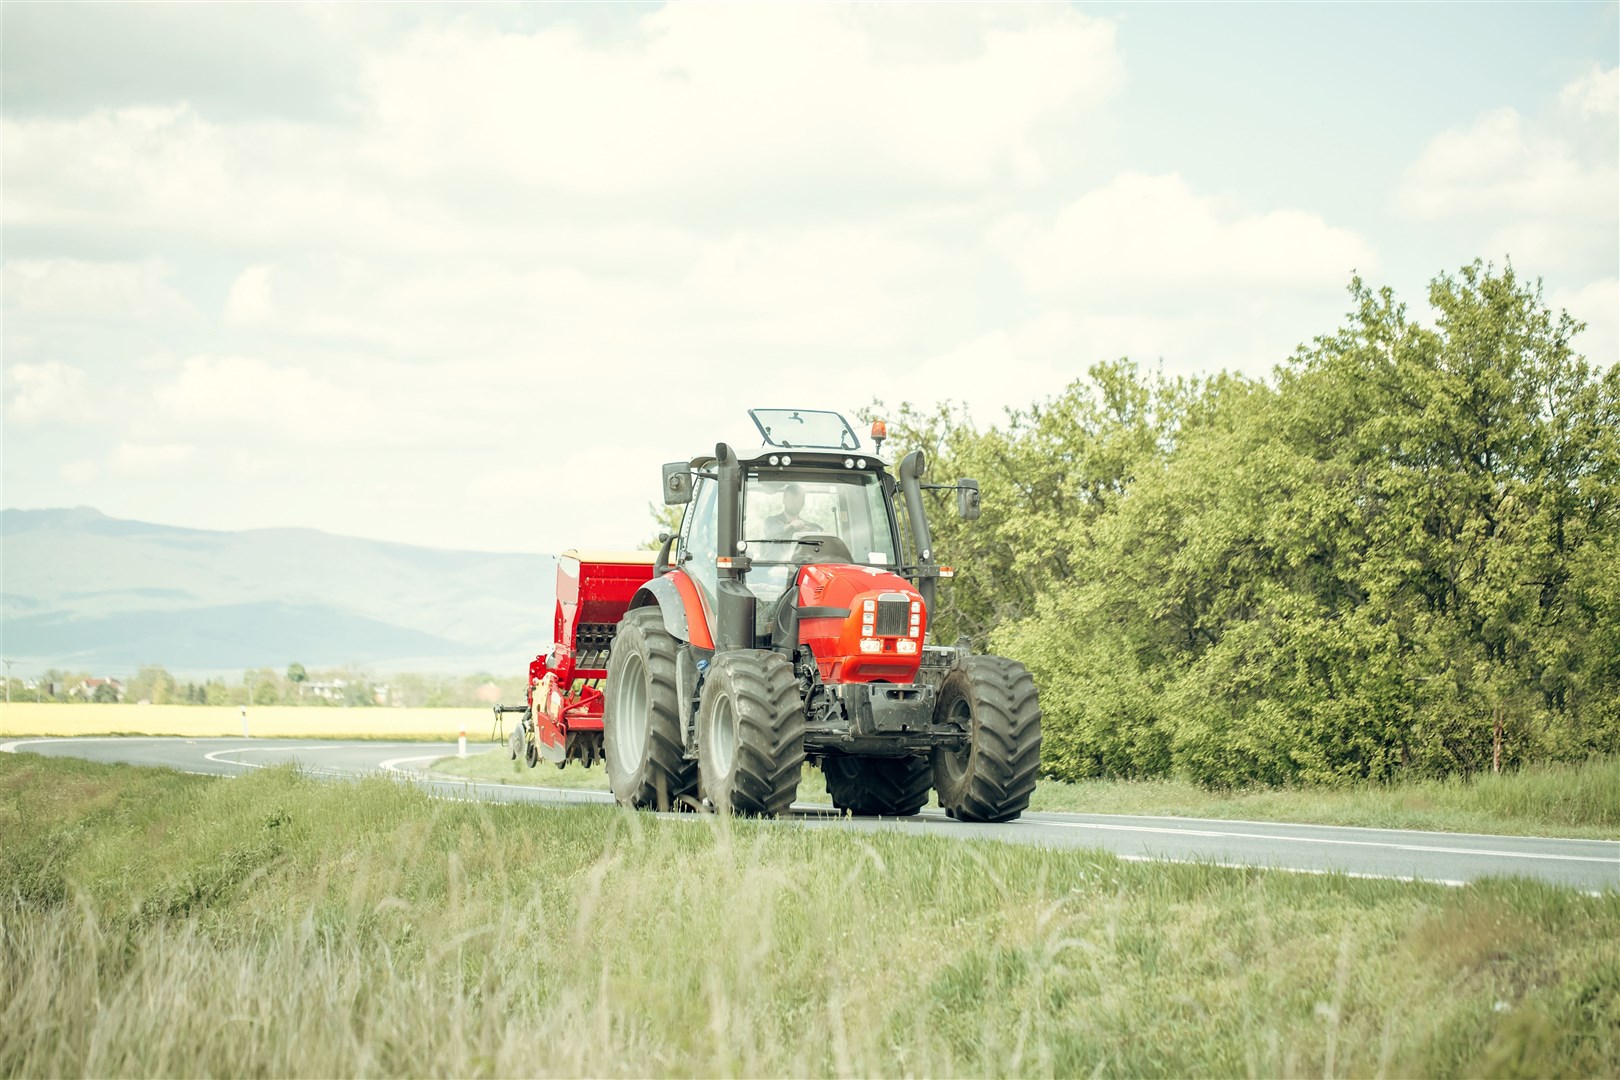 Farm traffic on rural roads is amongst the things to look out for, according to the rural insurer.